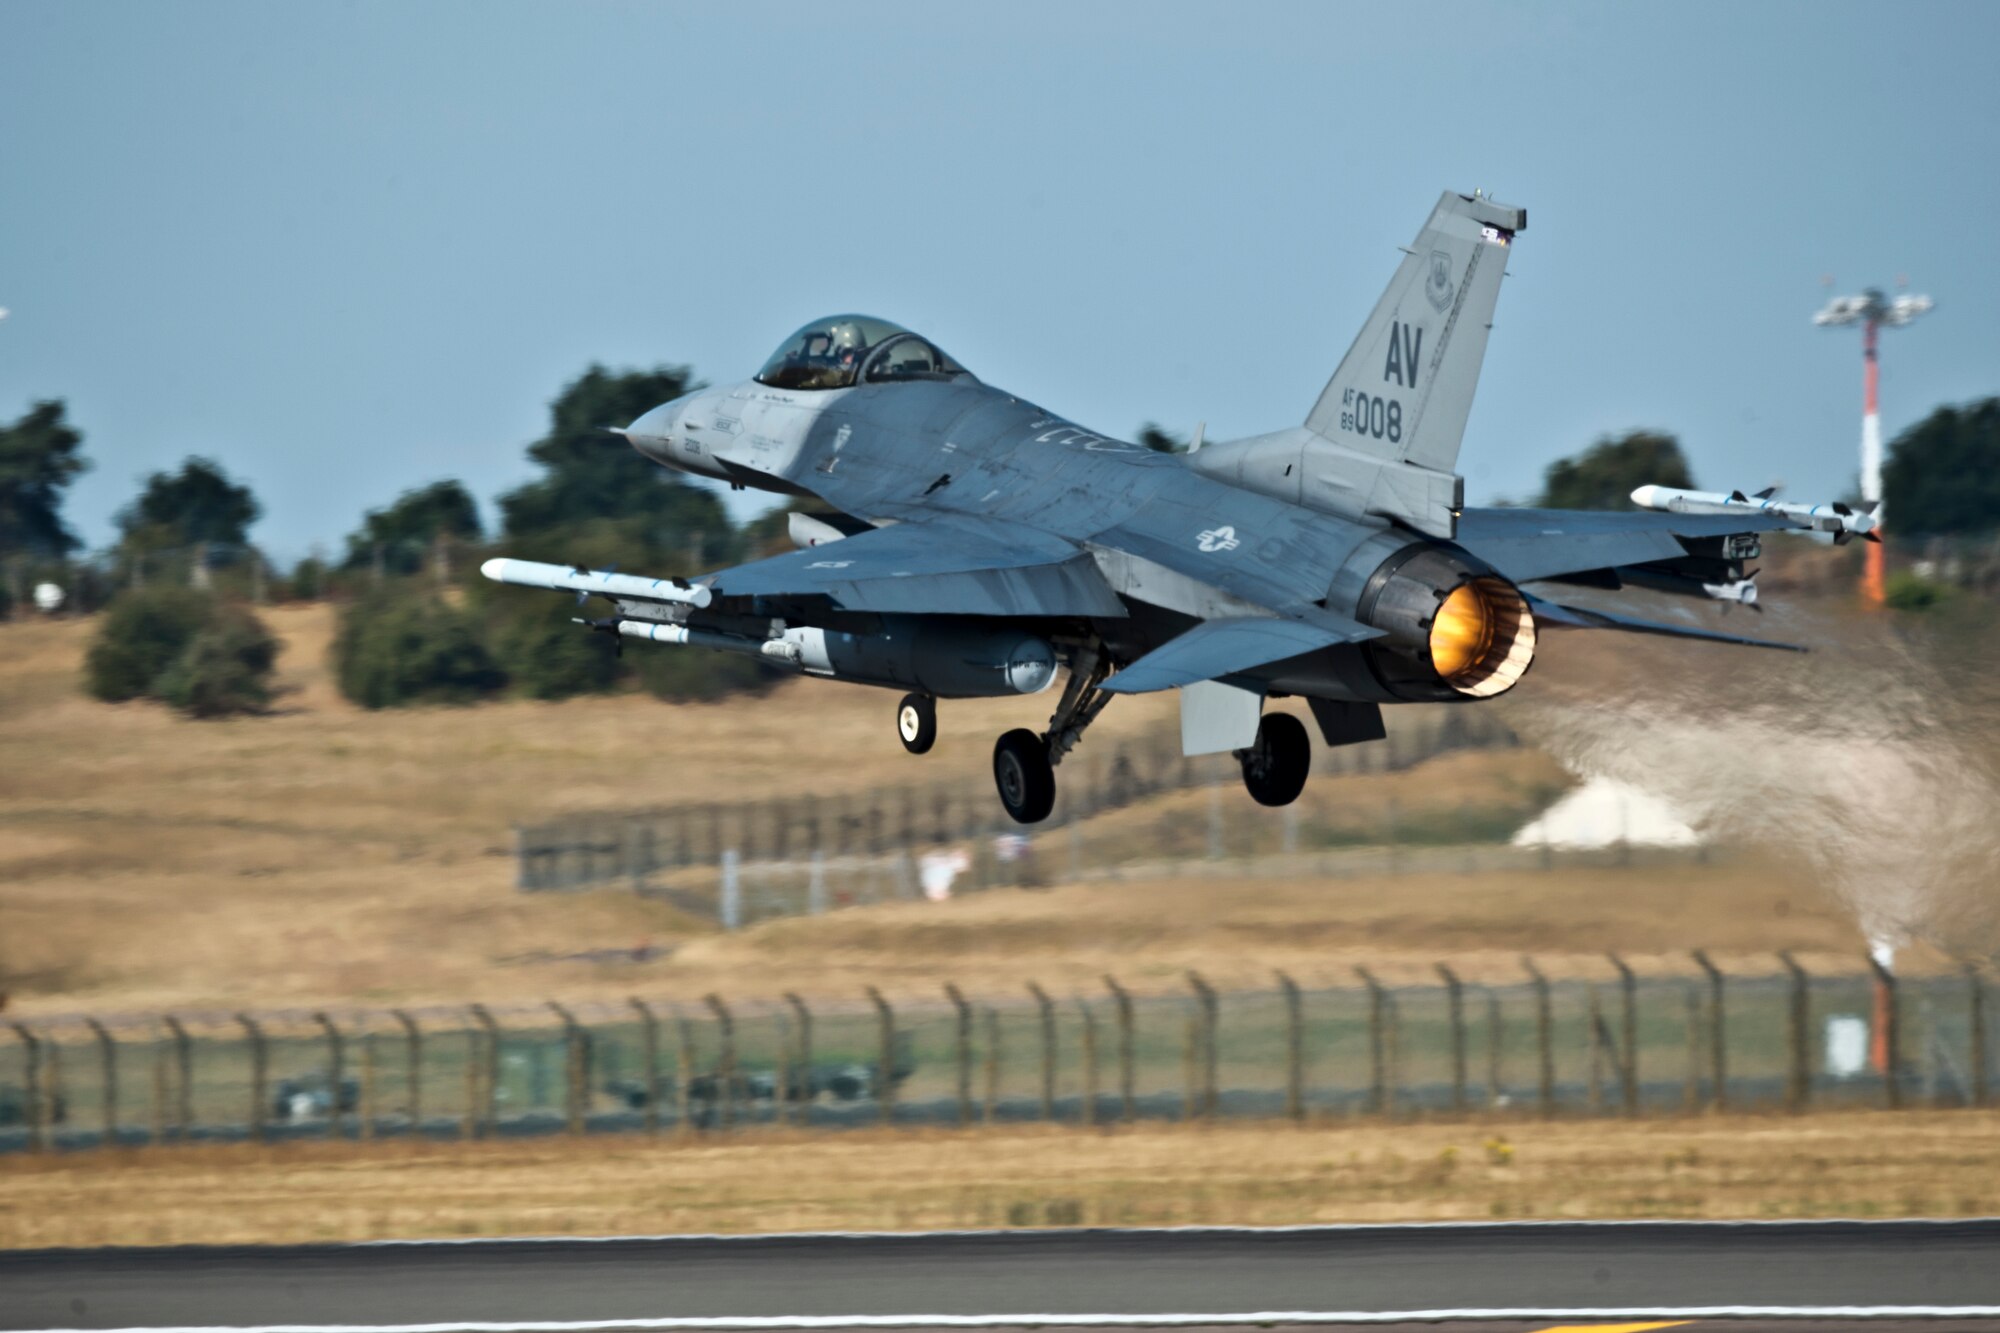 An F-16C Fighting Falcon from the 31st Fighter Wing, 510th Fighter Squadron, Aviano Air Base, Italy, takes off at Royal Air Force Lakenheath, England, Aug. 3, 2018. During a two-week flying training deployment to the United Kingdom, the 510th FS "Buzzards" flew approximately 332 hours across 168 sorties. (U.S. Air Force photo by Master Sgt. Eric Burks)